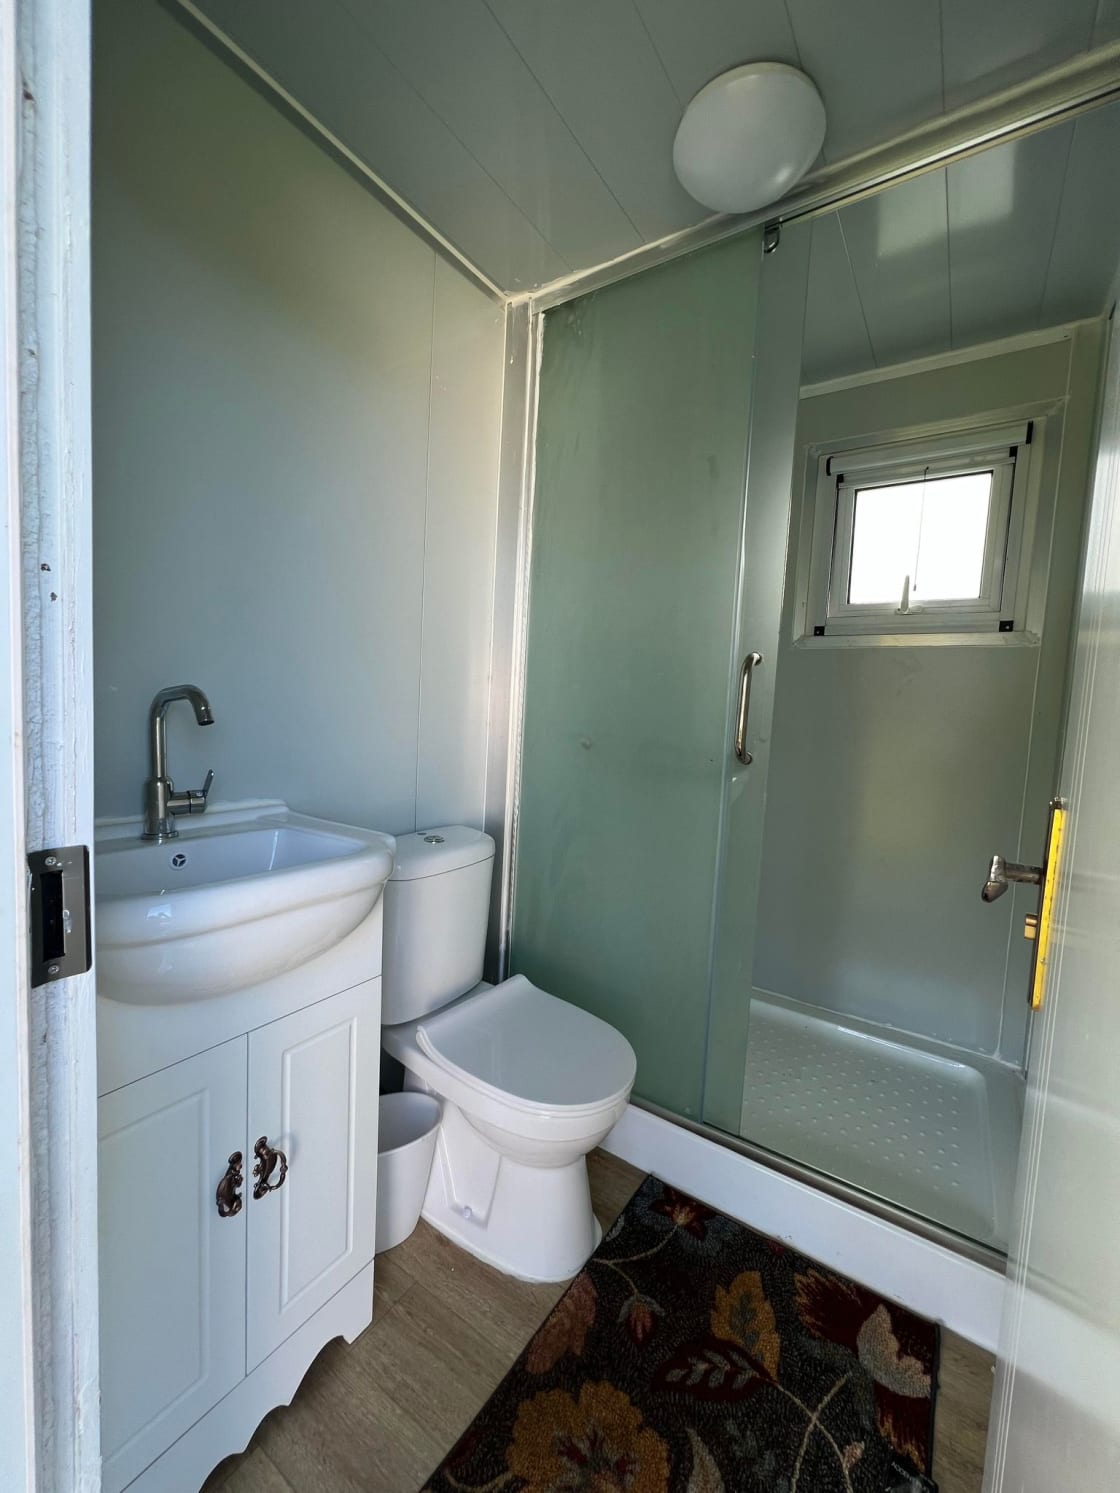 Private restroom facility with shower, toilet and sink